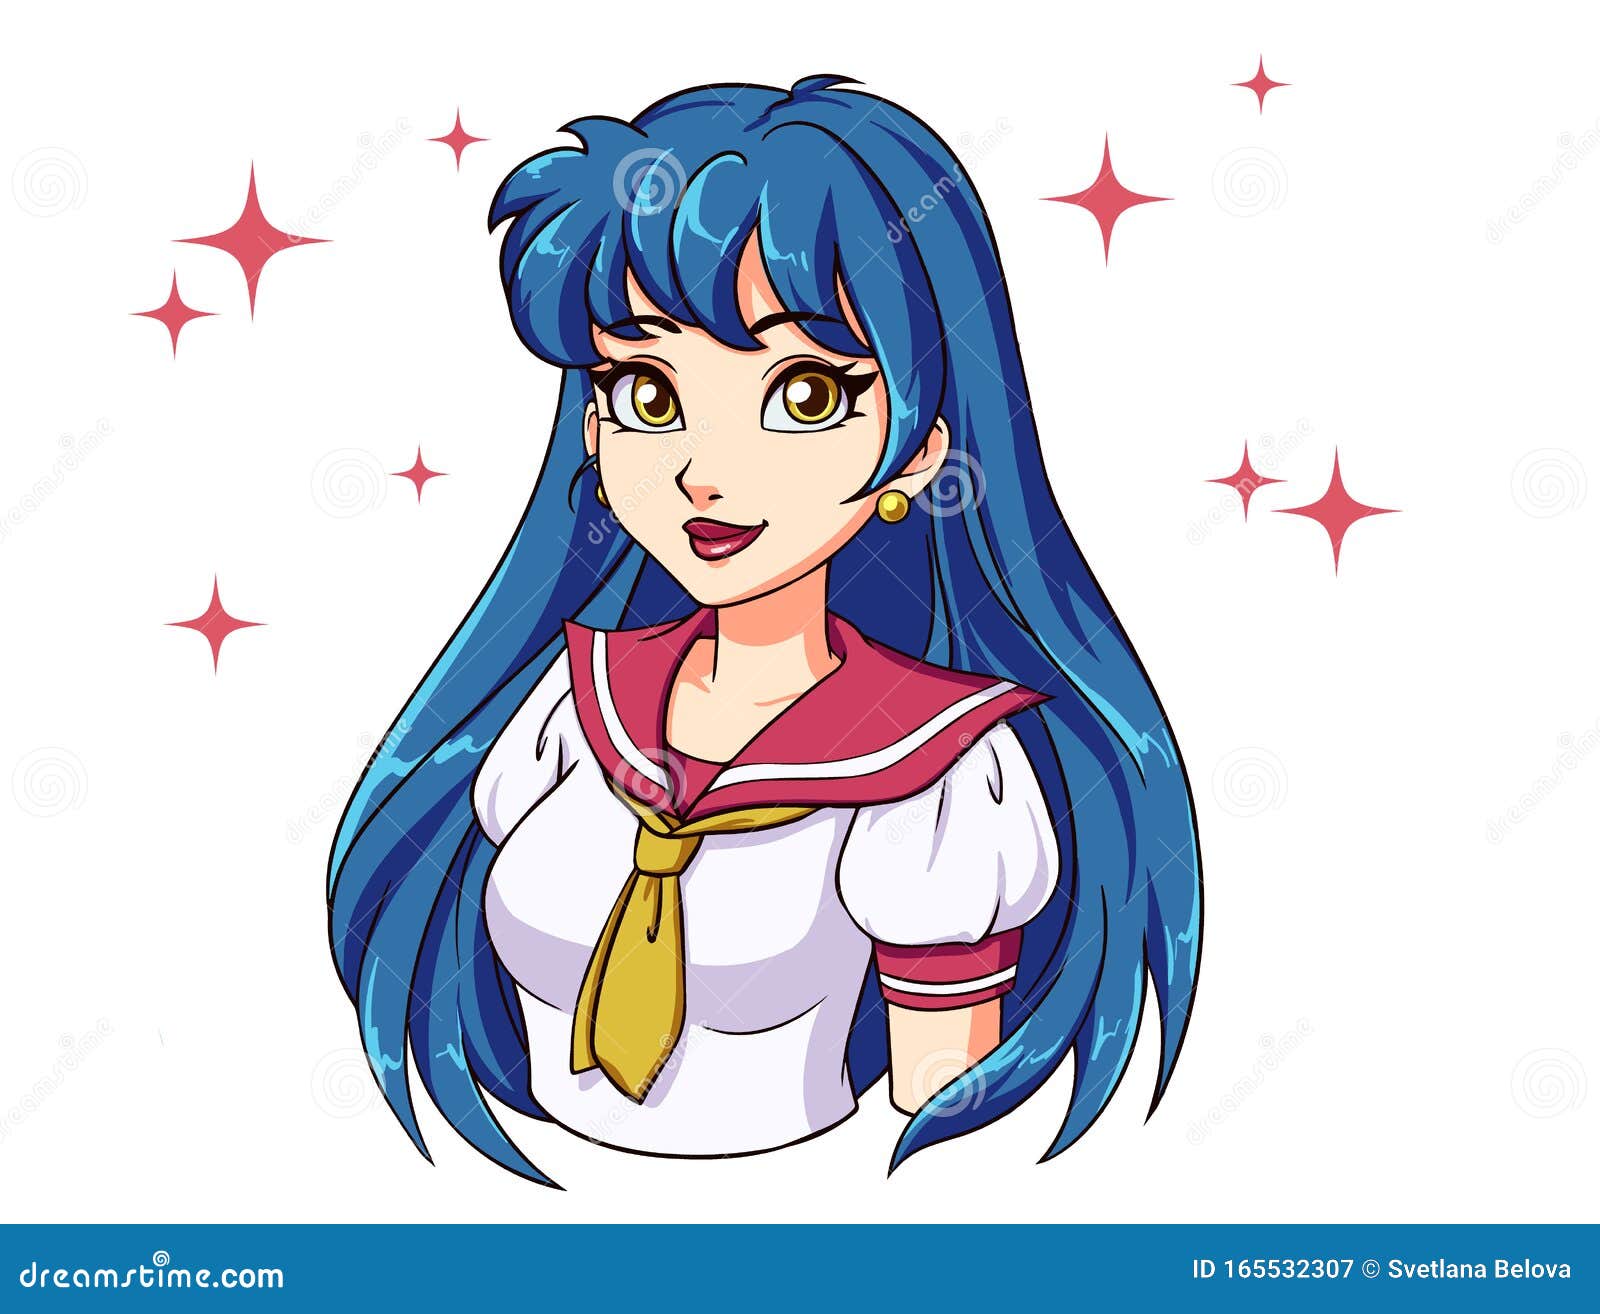 Cartoon girl with blue hair and freckled nose - wide 1